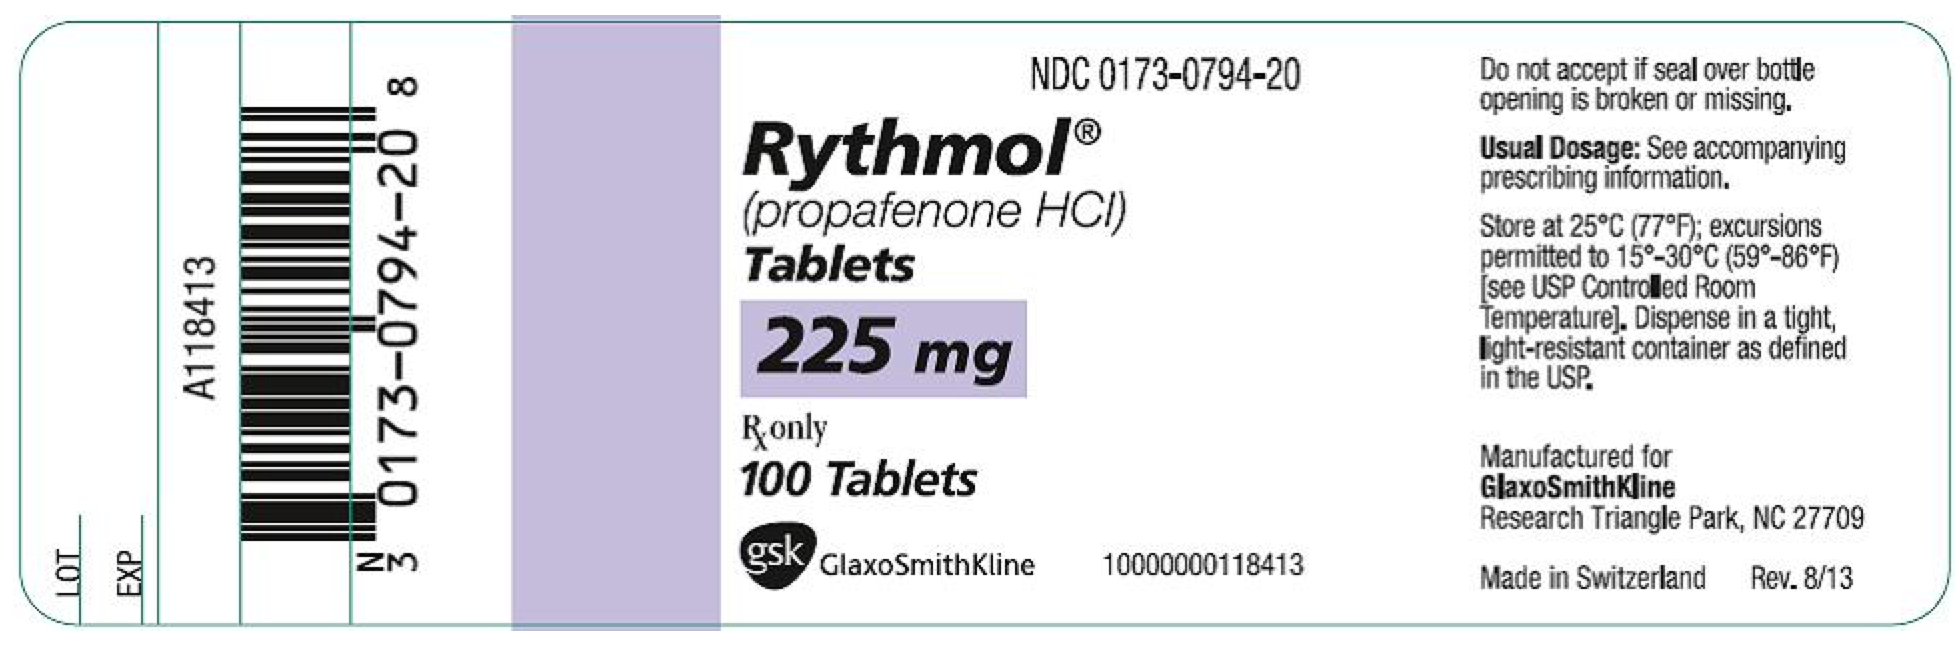 File:Propafenone06.png